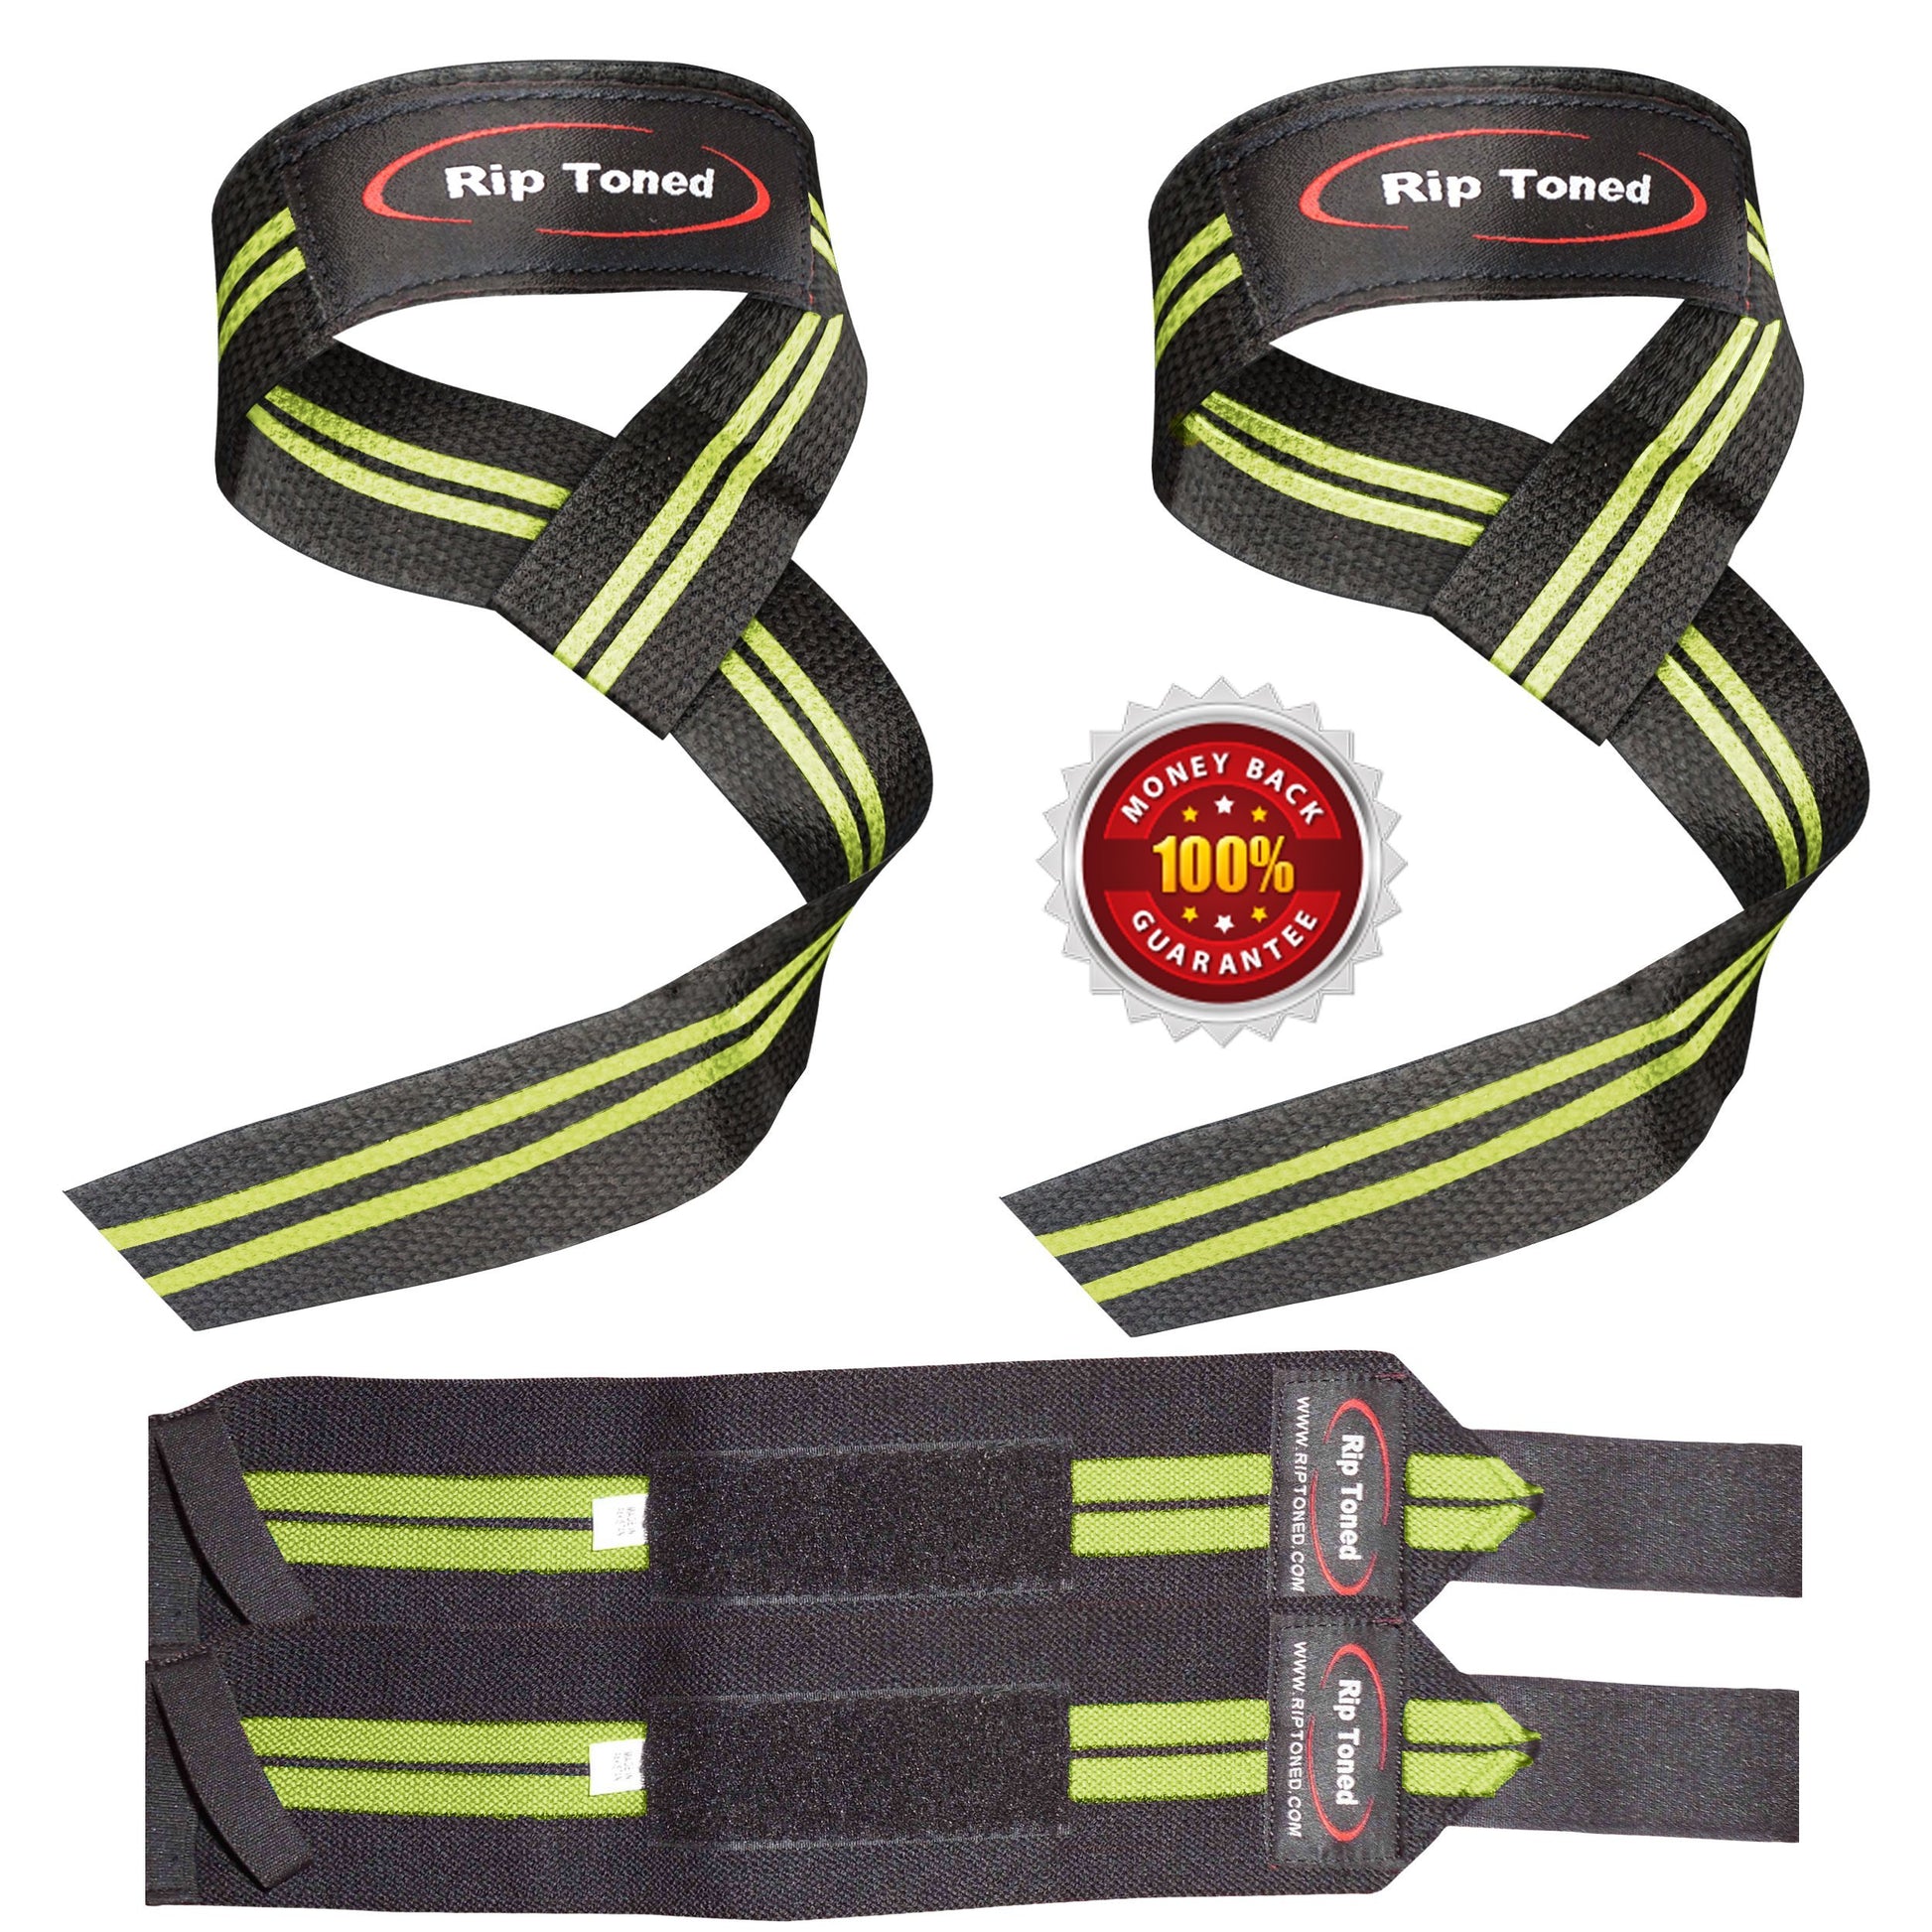 Lifting Straps By Rip Toned (PAIR) - Normal or Small Wrists - Cotton Padded  - Weightlifting, Xfit, Bodybuilding, Strength Training, Powerlifting,  Straps -  Canada